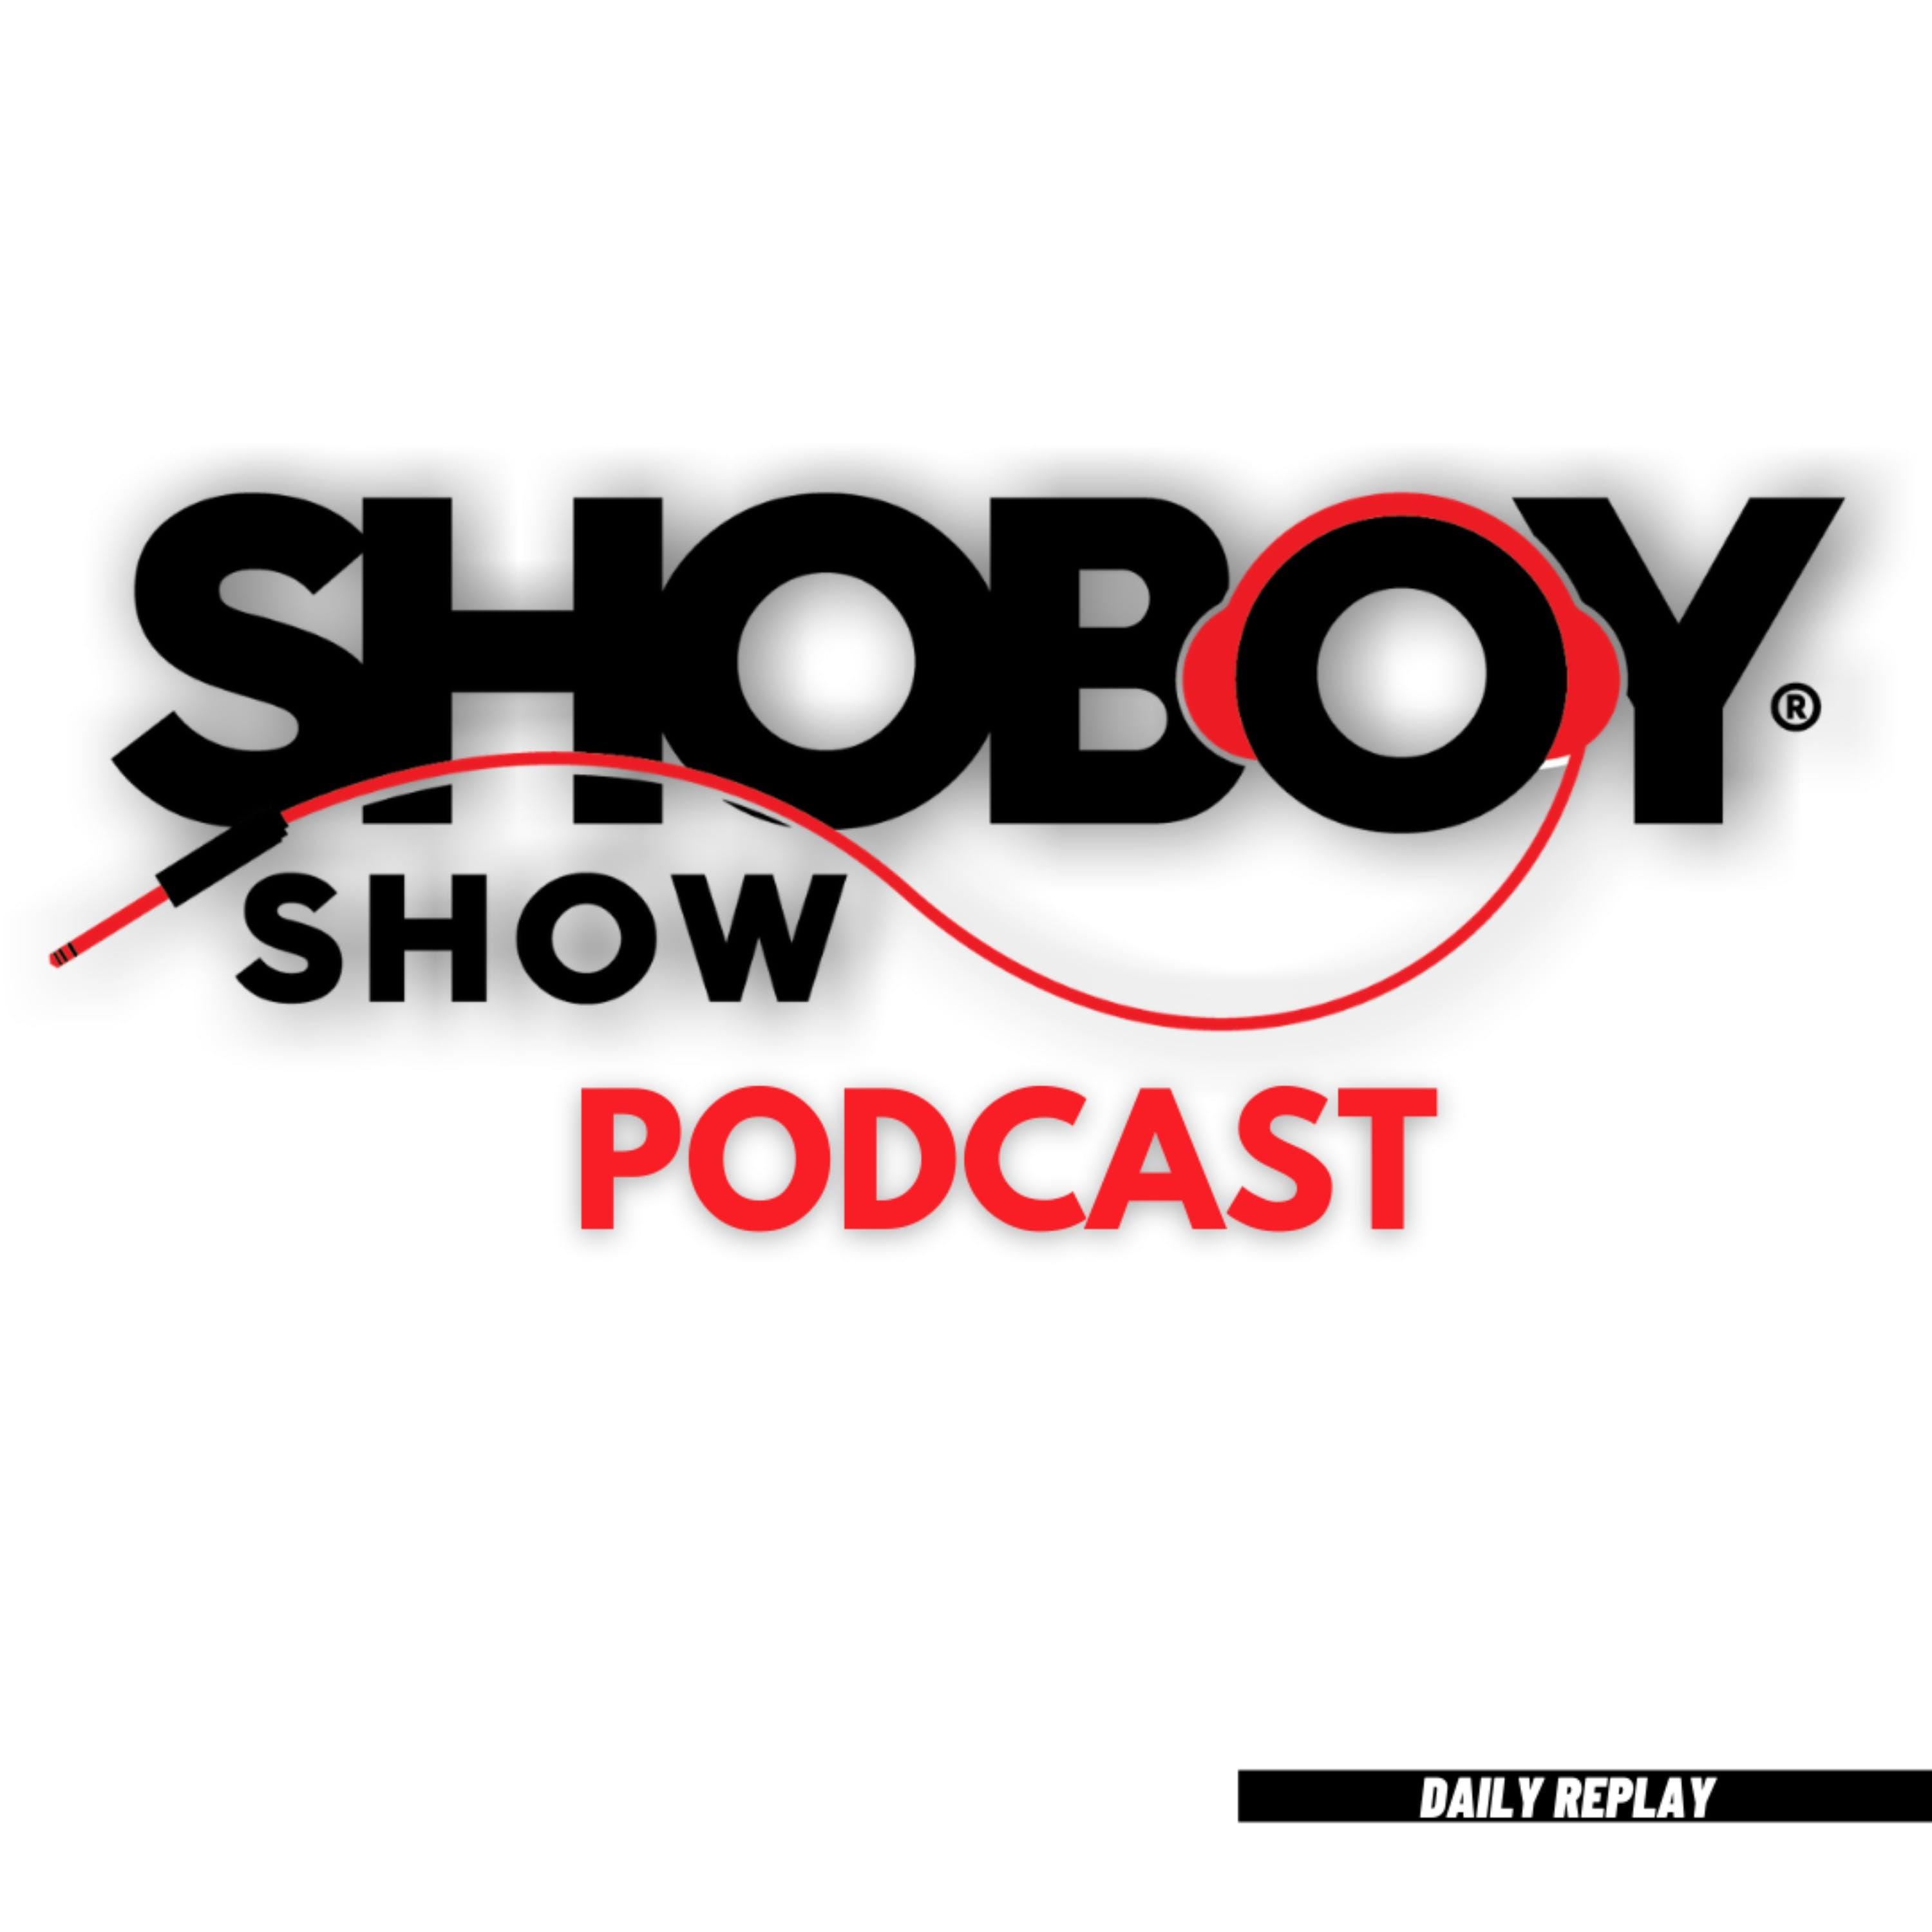 Show poster of Shoboy Show